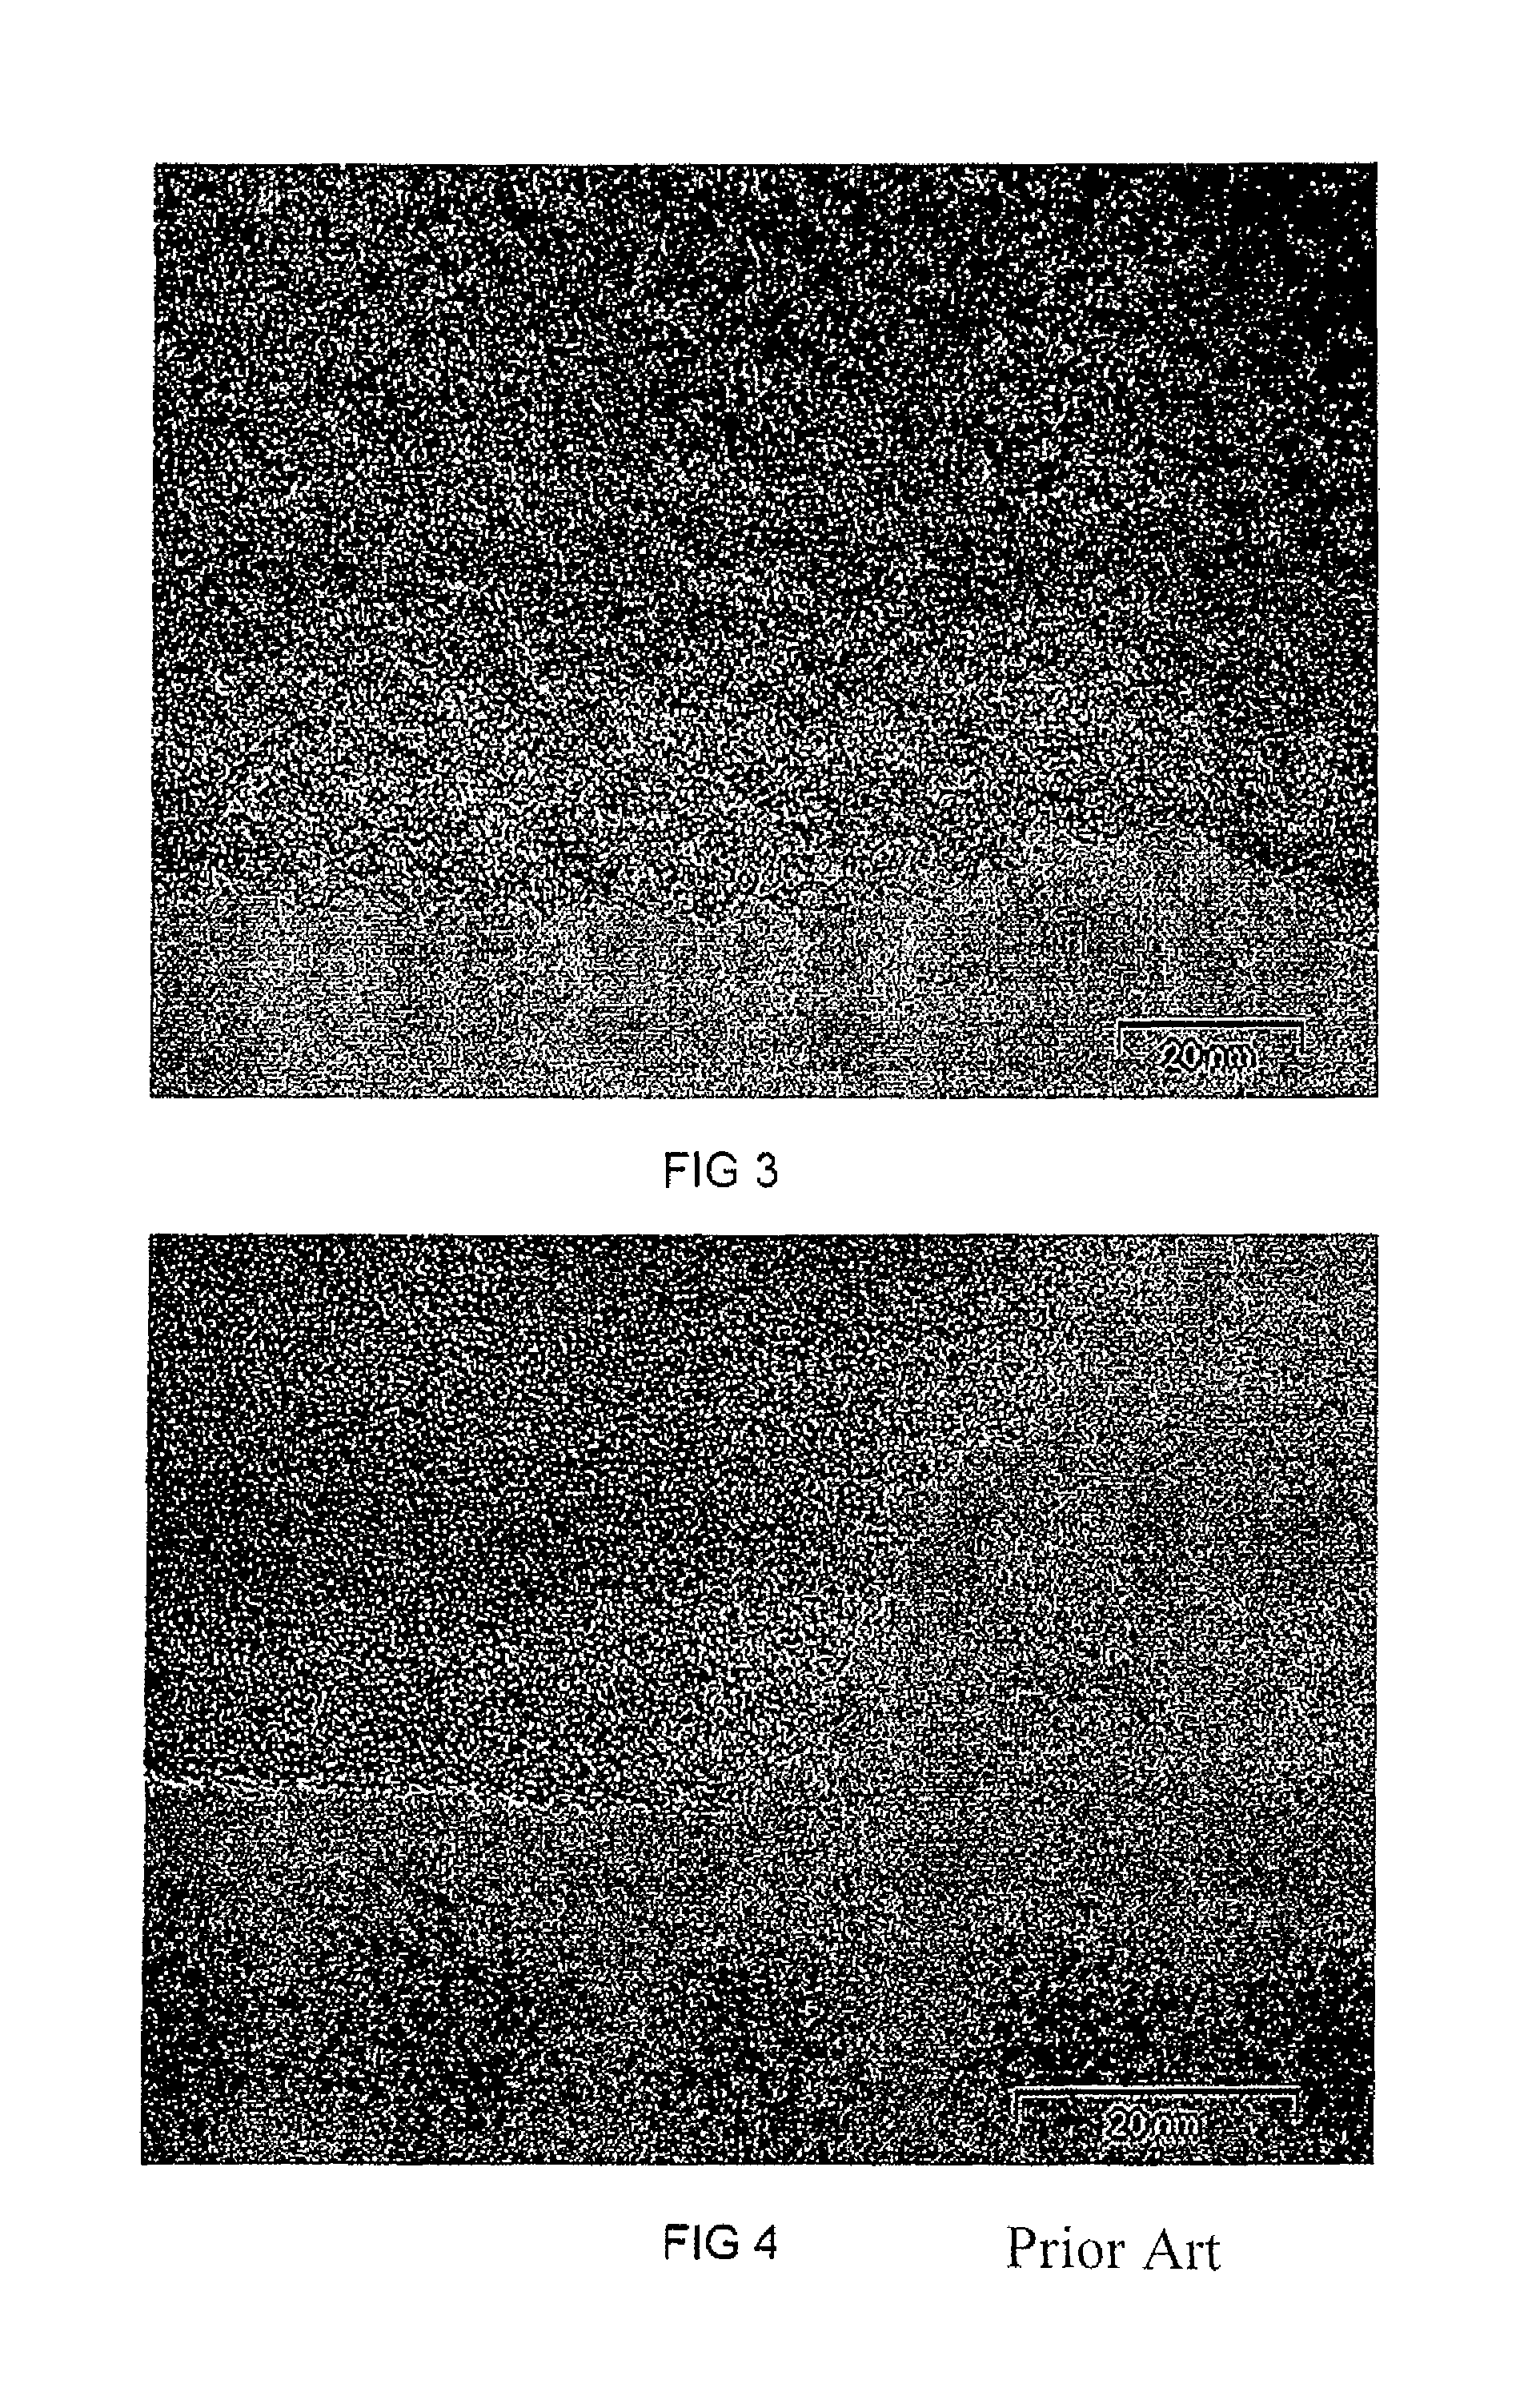 Method of making the porous carbon material of different pore sizes and porous carbon materials produced by the method